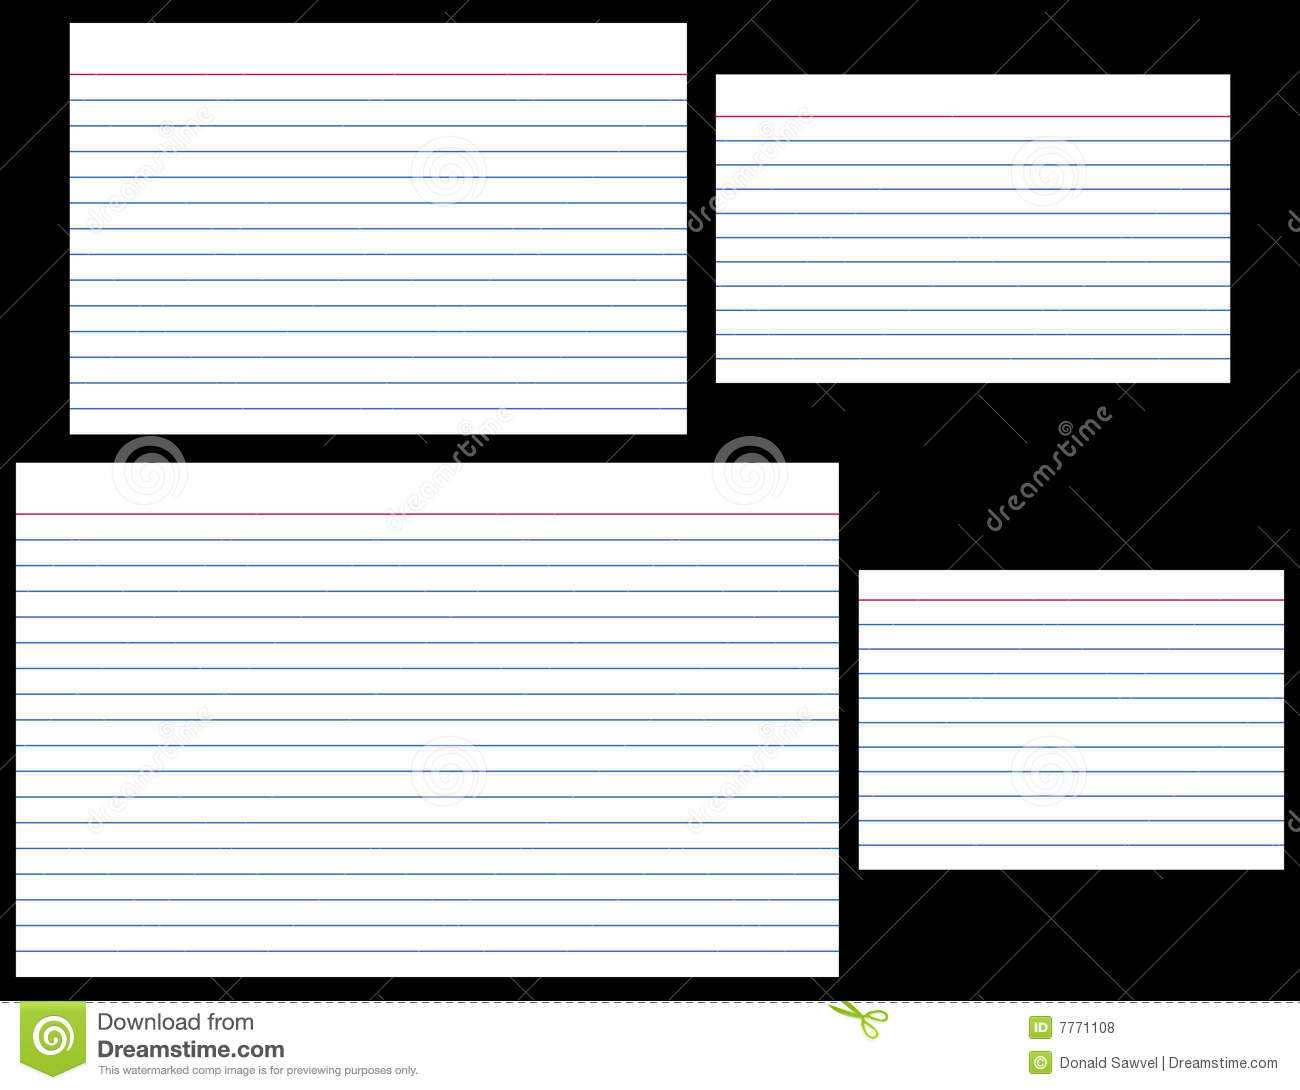 Index Cards Stock Vector. Illustration Of Stationery, Lined In 3 By 5 Index Card Template